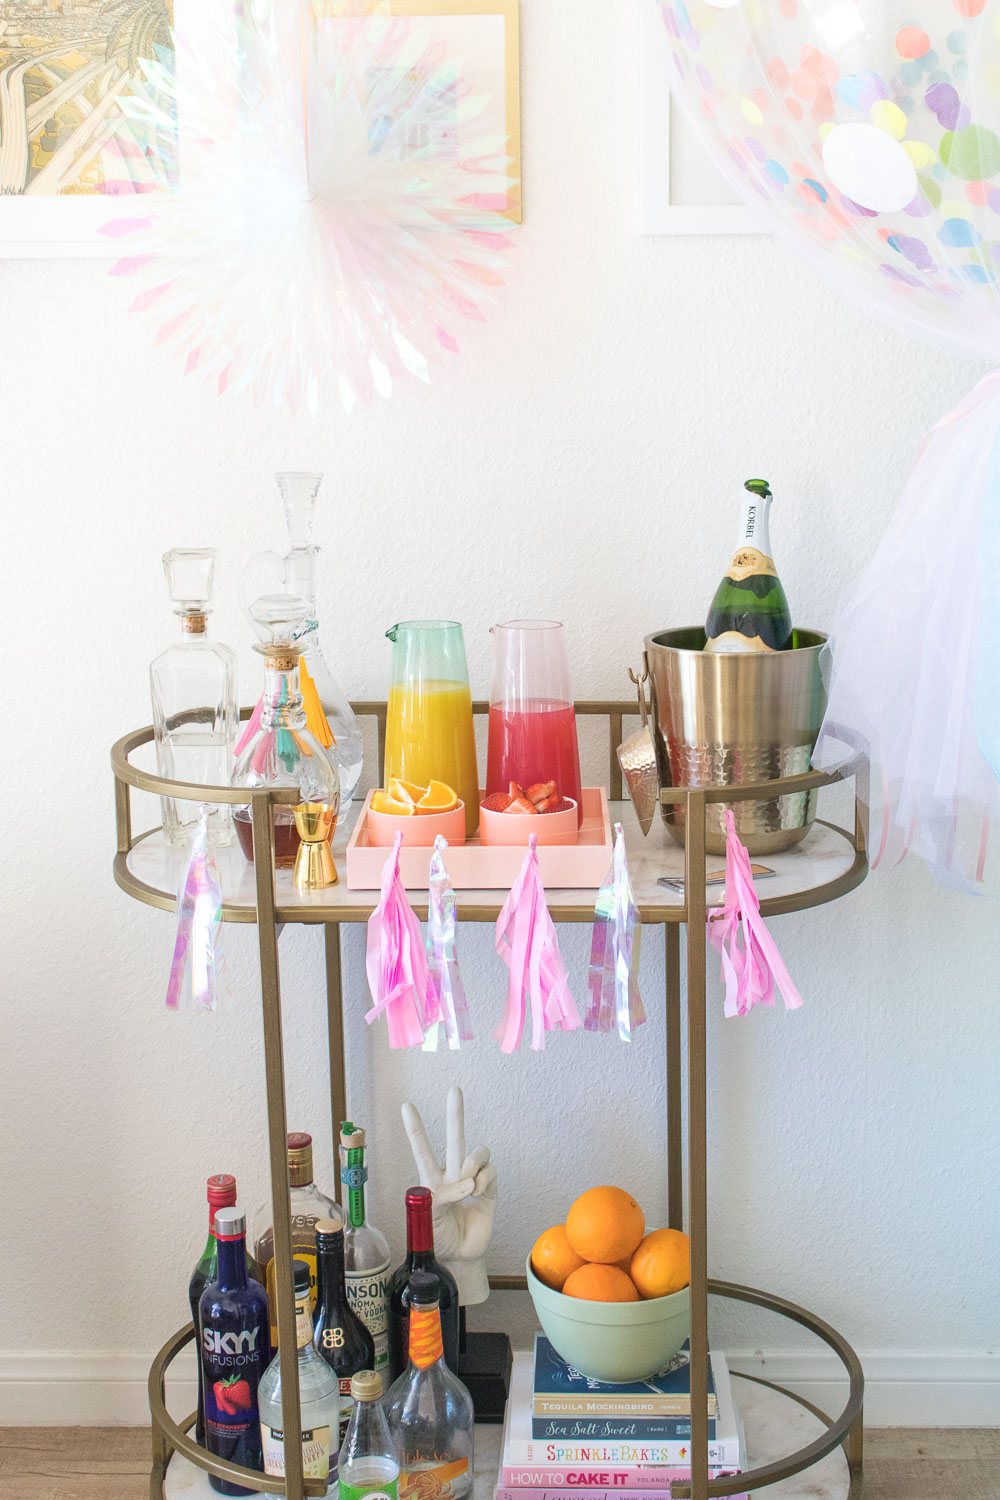 How to Plan a Pretty Pastel Easter Brunch | Club Crafted